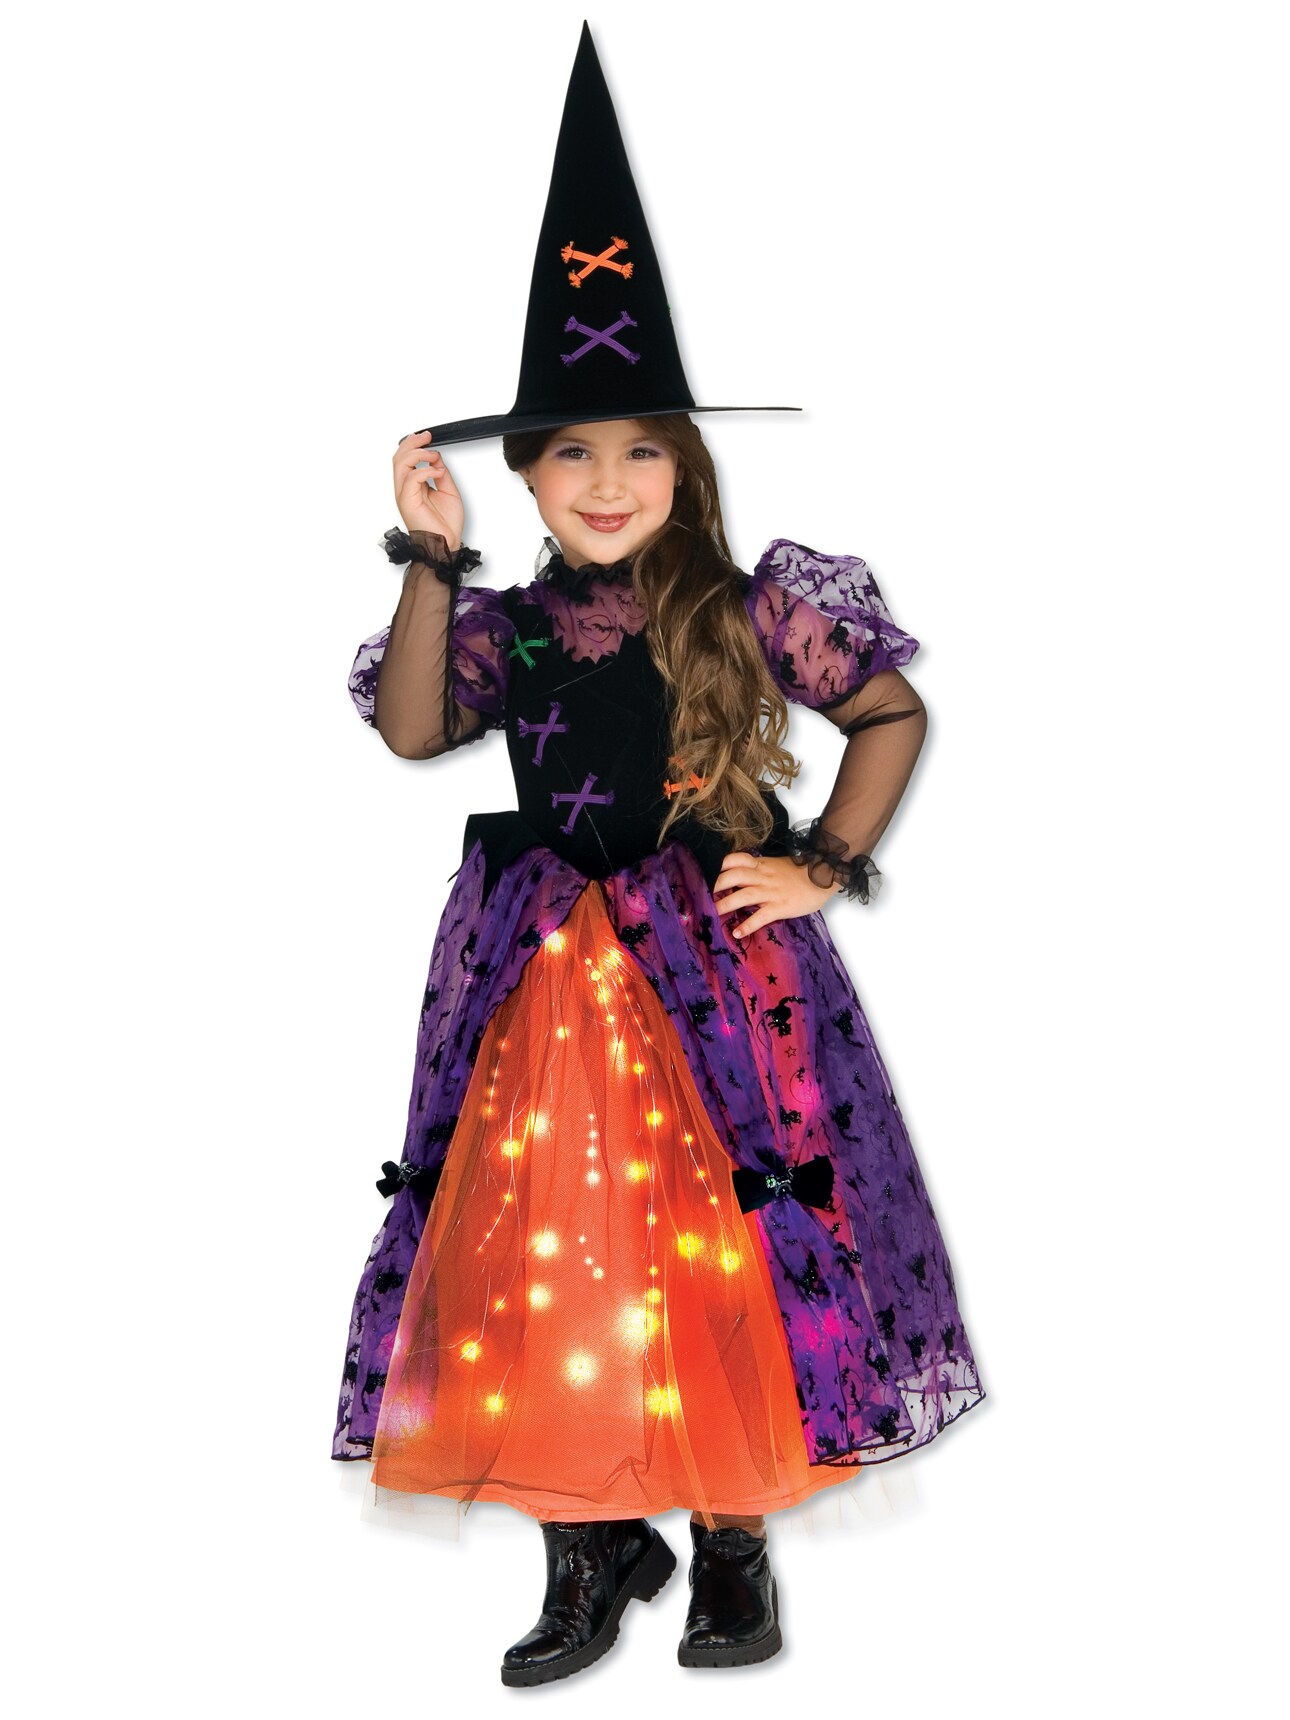 Rubie's Costumes Medium Polyester Girls' Costume at Lowes.com